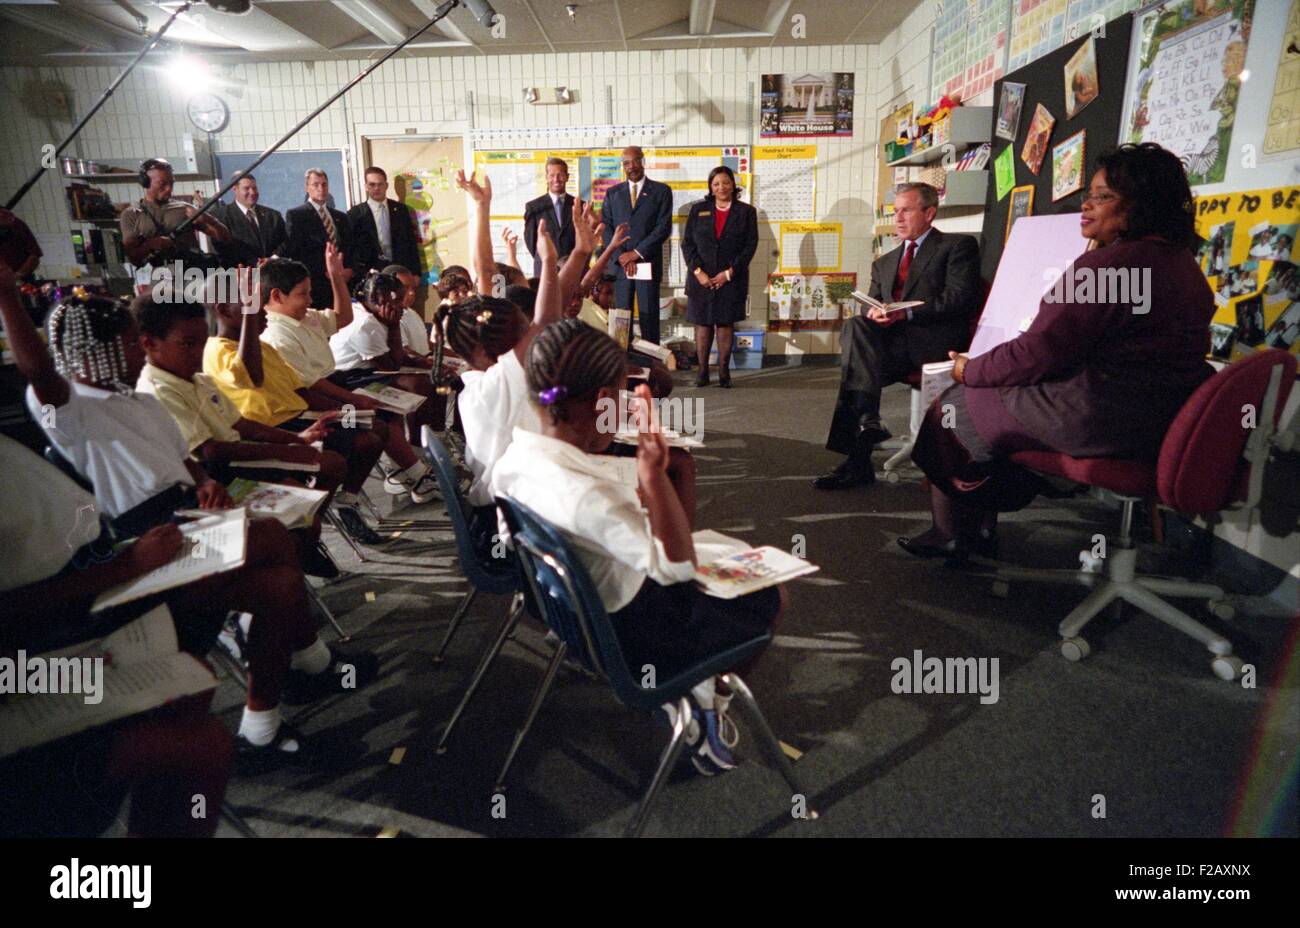 On the morning of the 9-11 Terrorist Attacks, President Bush was in a classroom in Sarasota, FL. Photo shows him observing a reading demonstration, at Emma E. Booker Elementary School. Sept. 11, 2001. (BSLOC 2015 2 130) Stock Photo